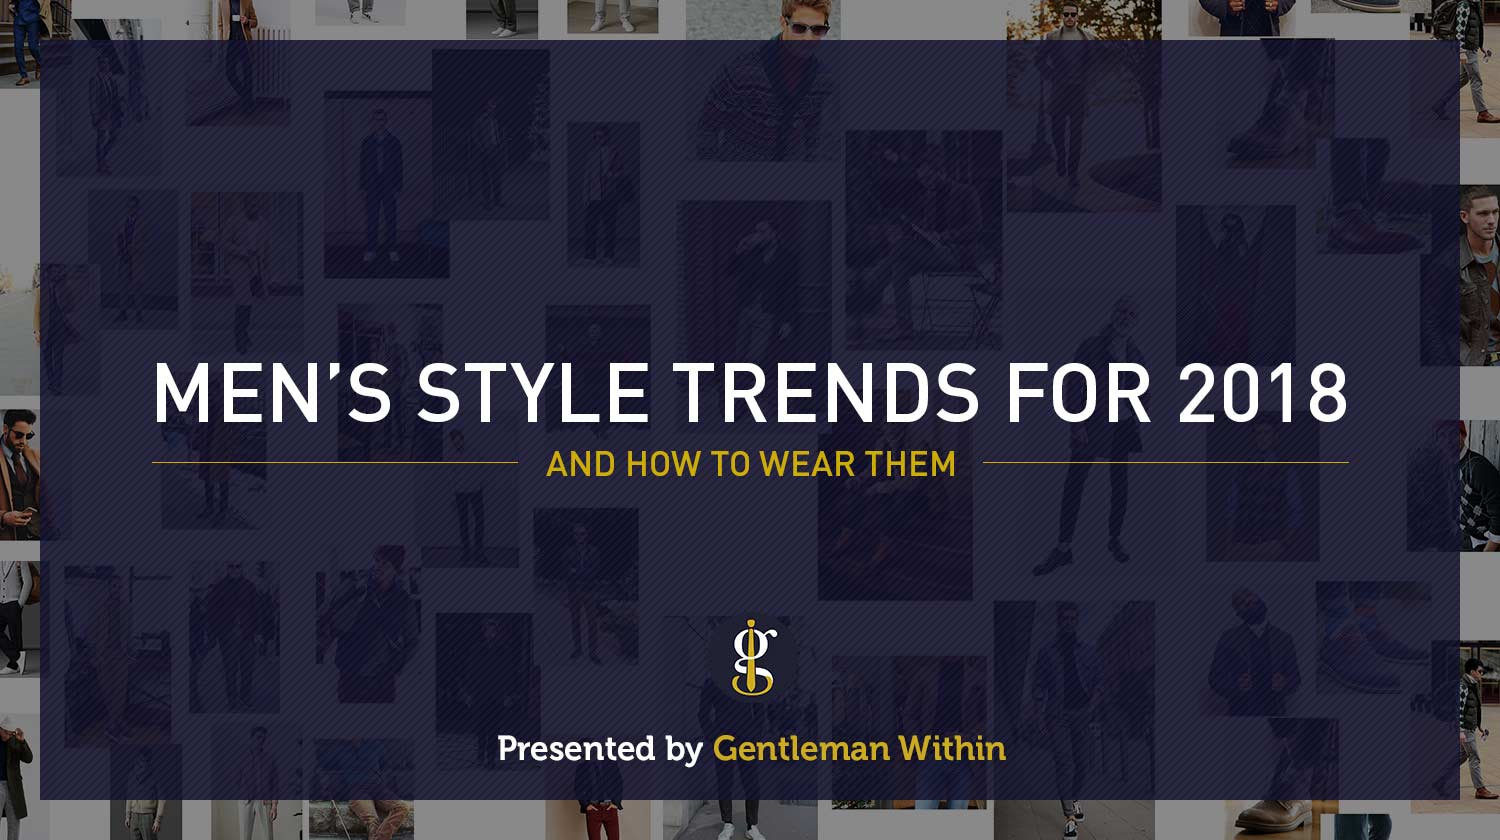 5 Men's Style Trends For 2018 & How To Wear Them | GENTLEMAN WITHIN